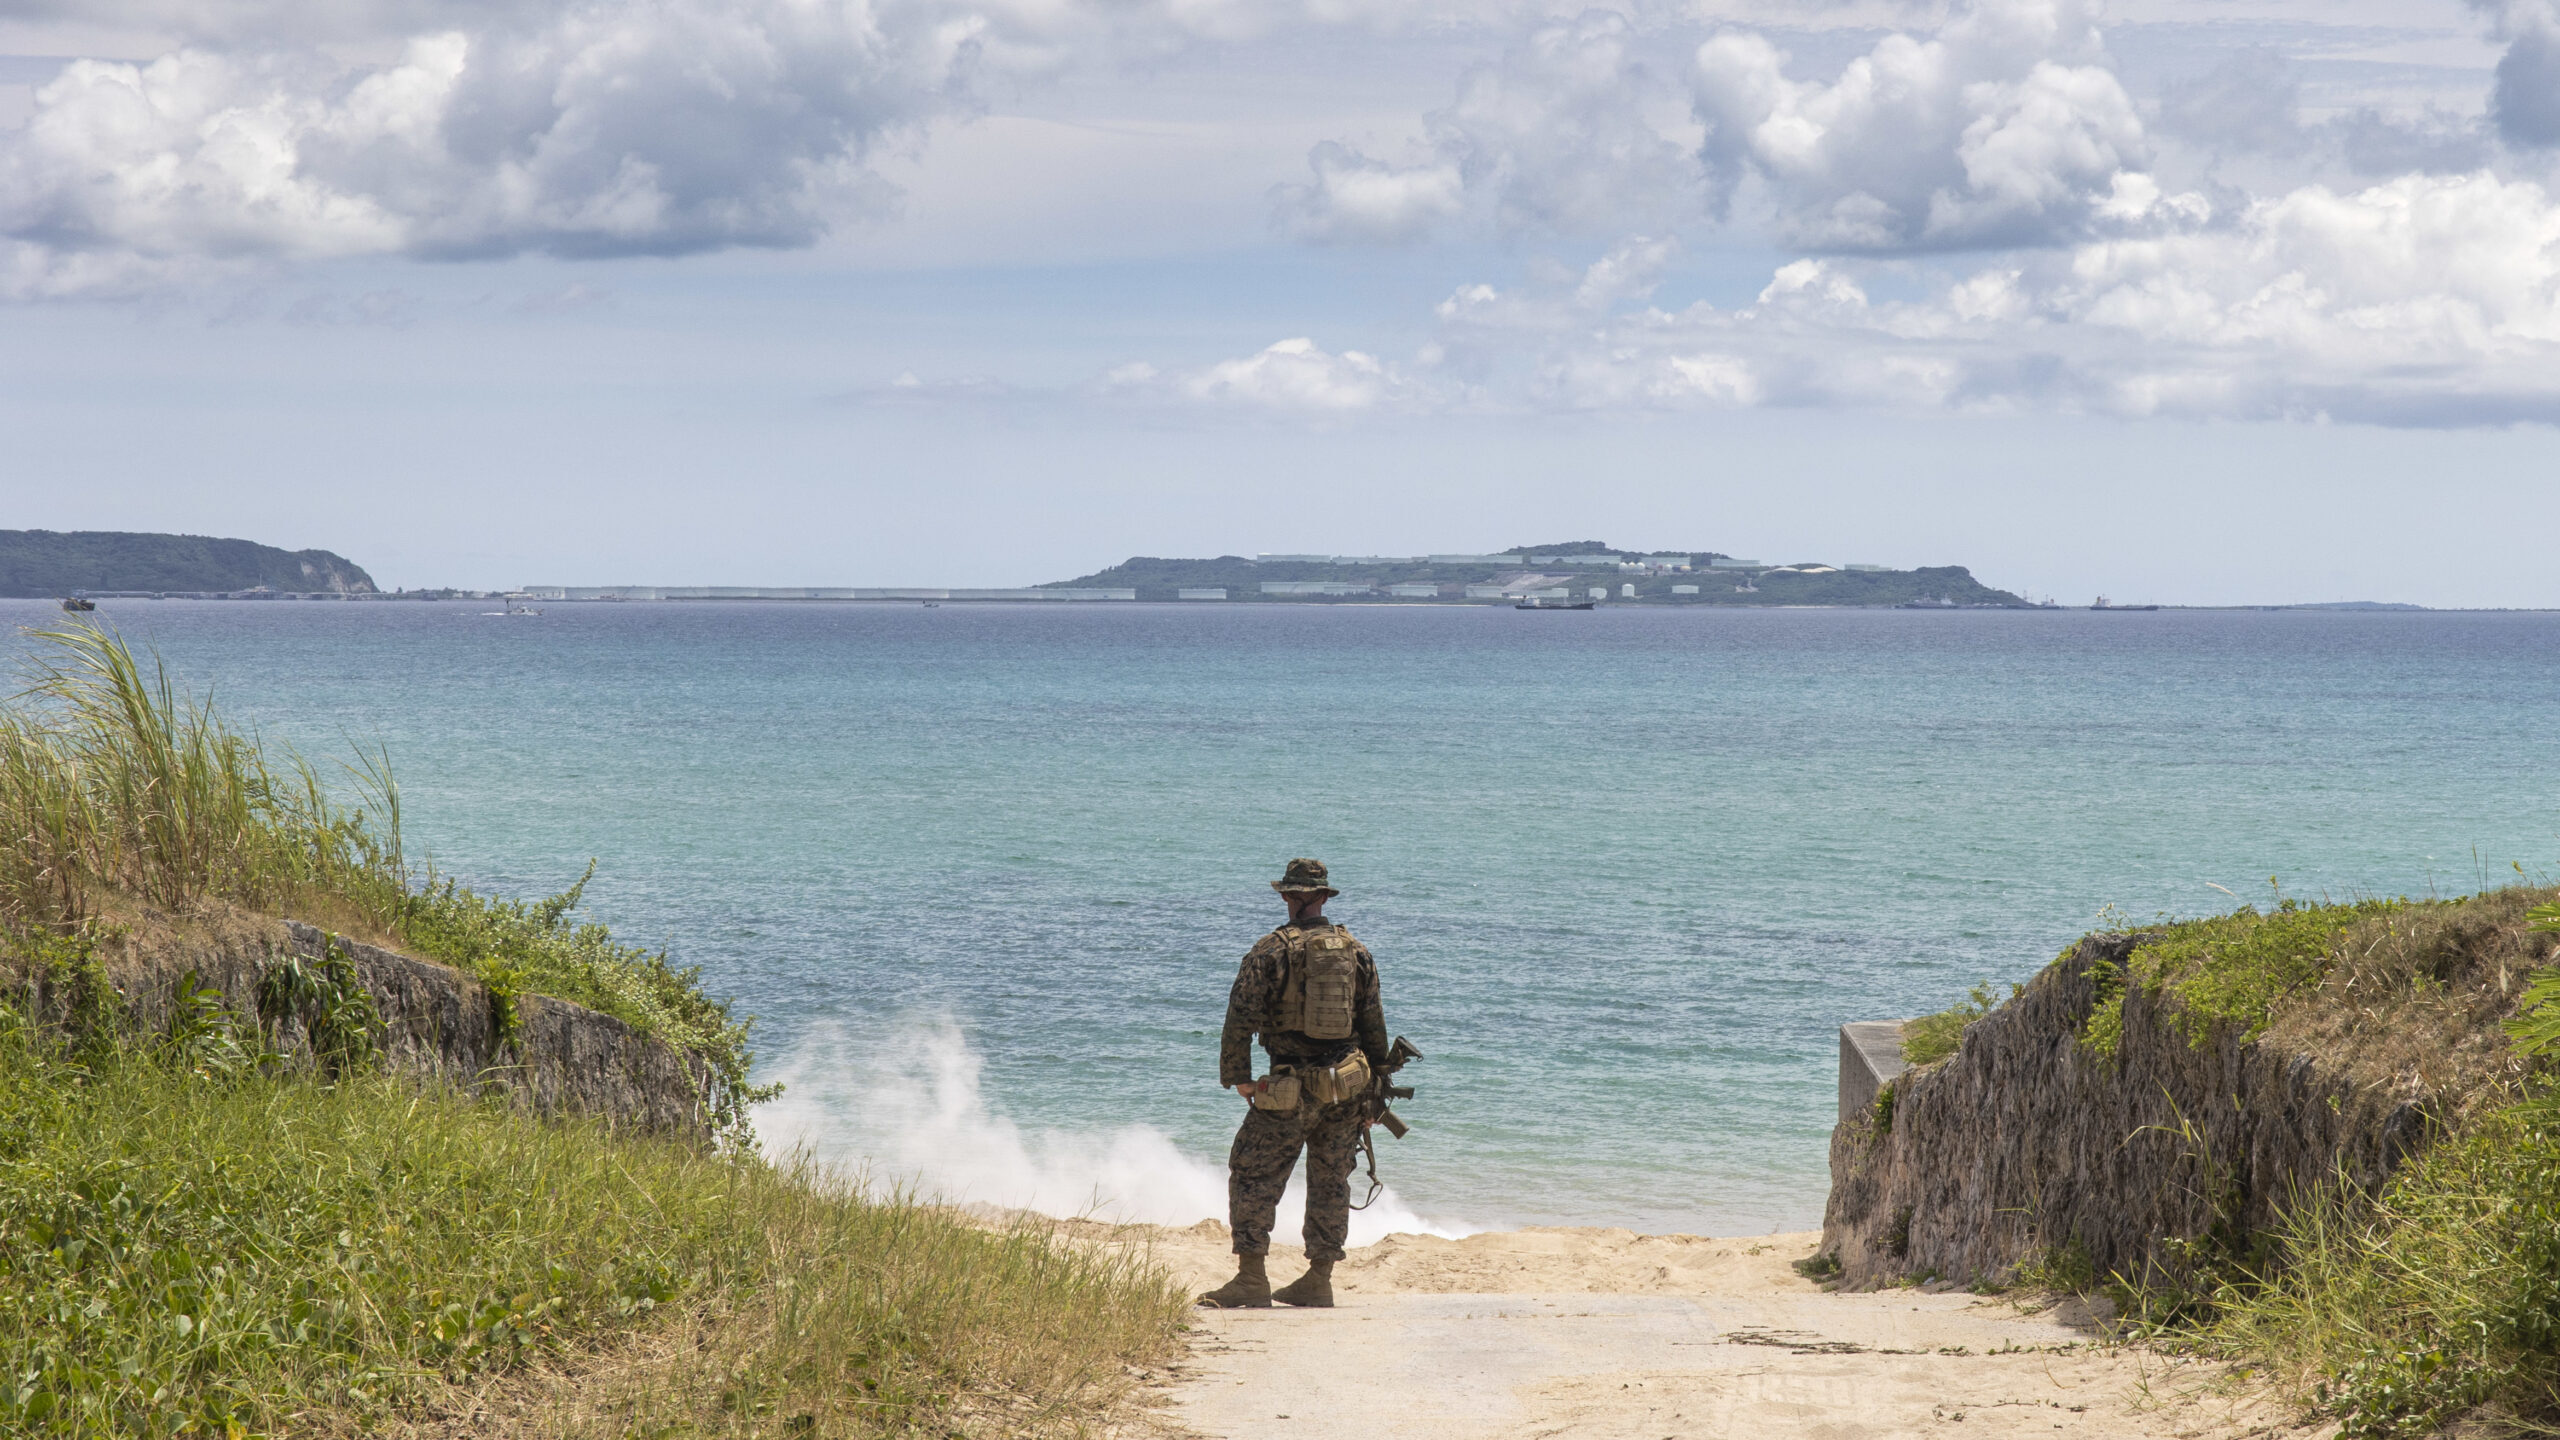 Japan signs off on Marines plan for new littoral ‘stand-in’ group in Okinawa